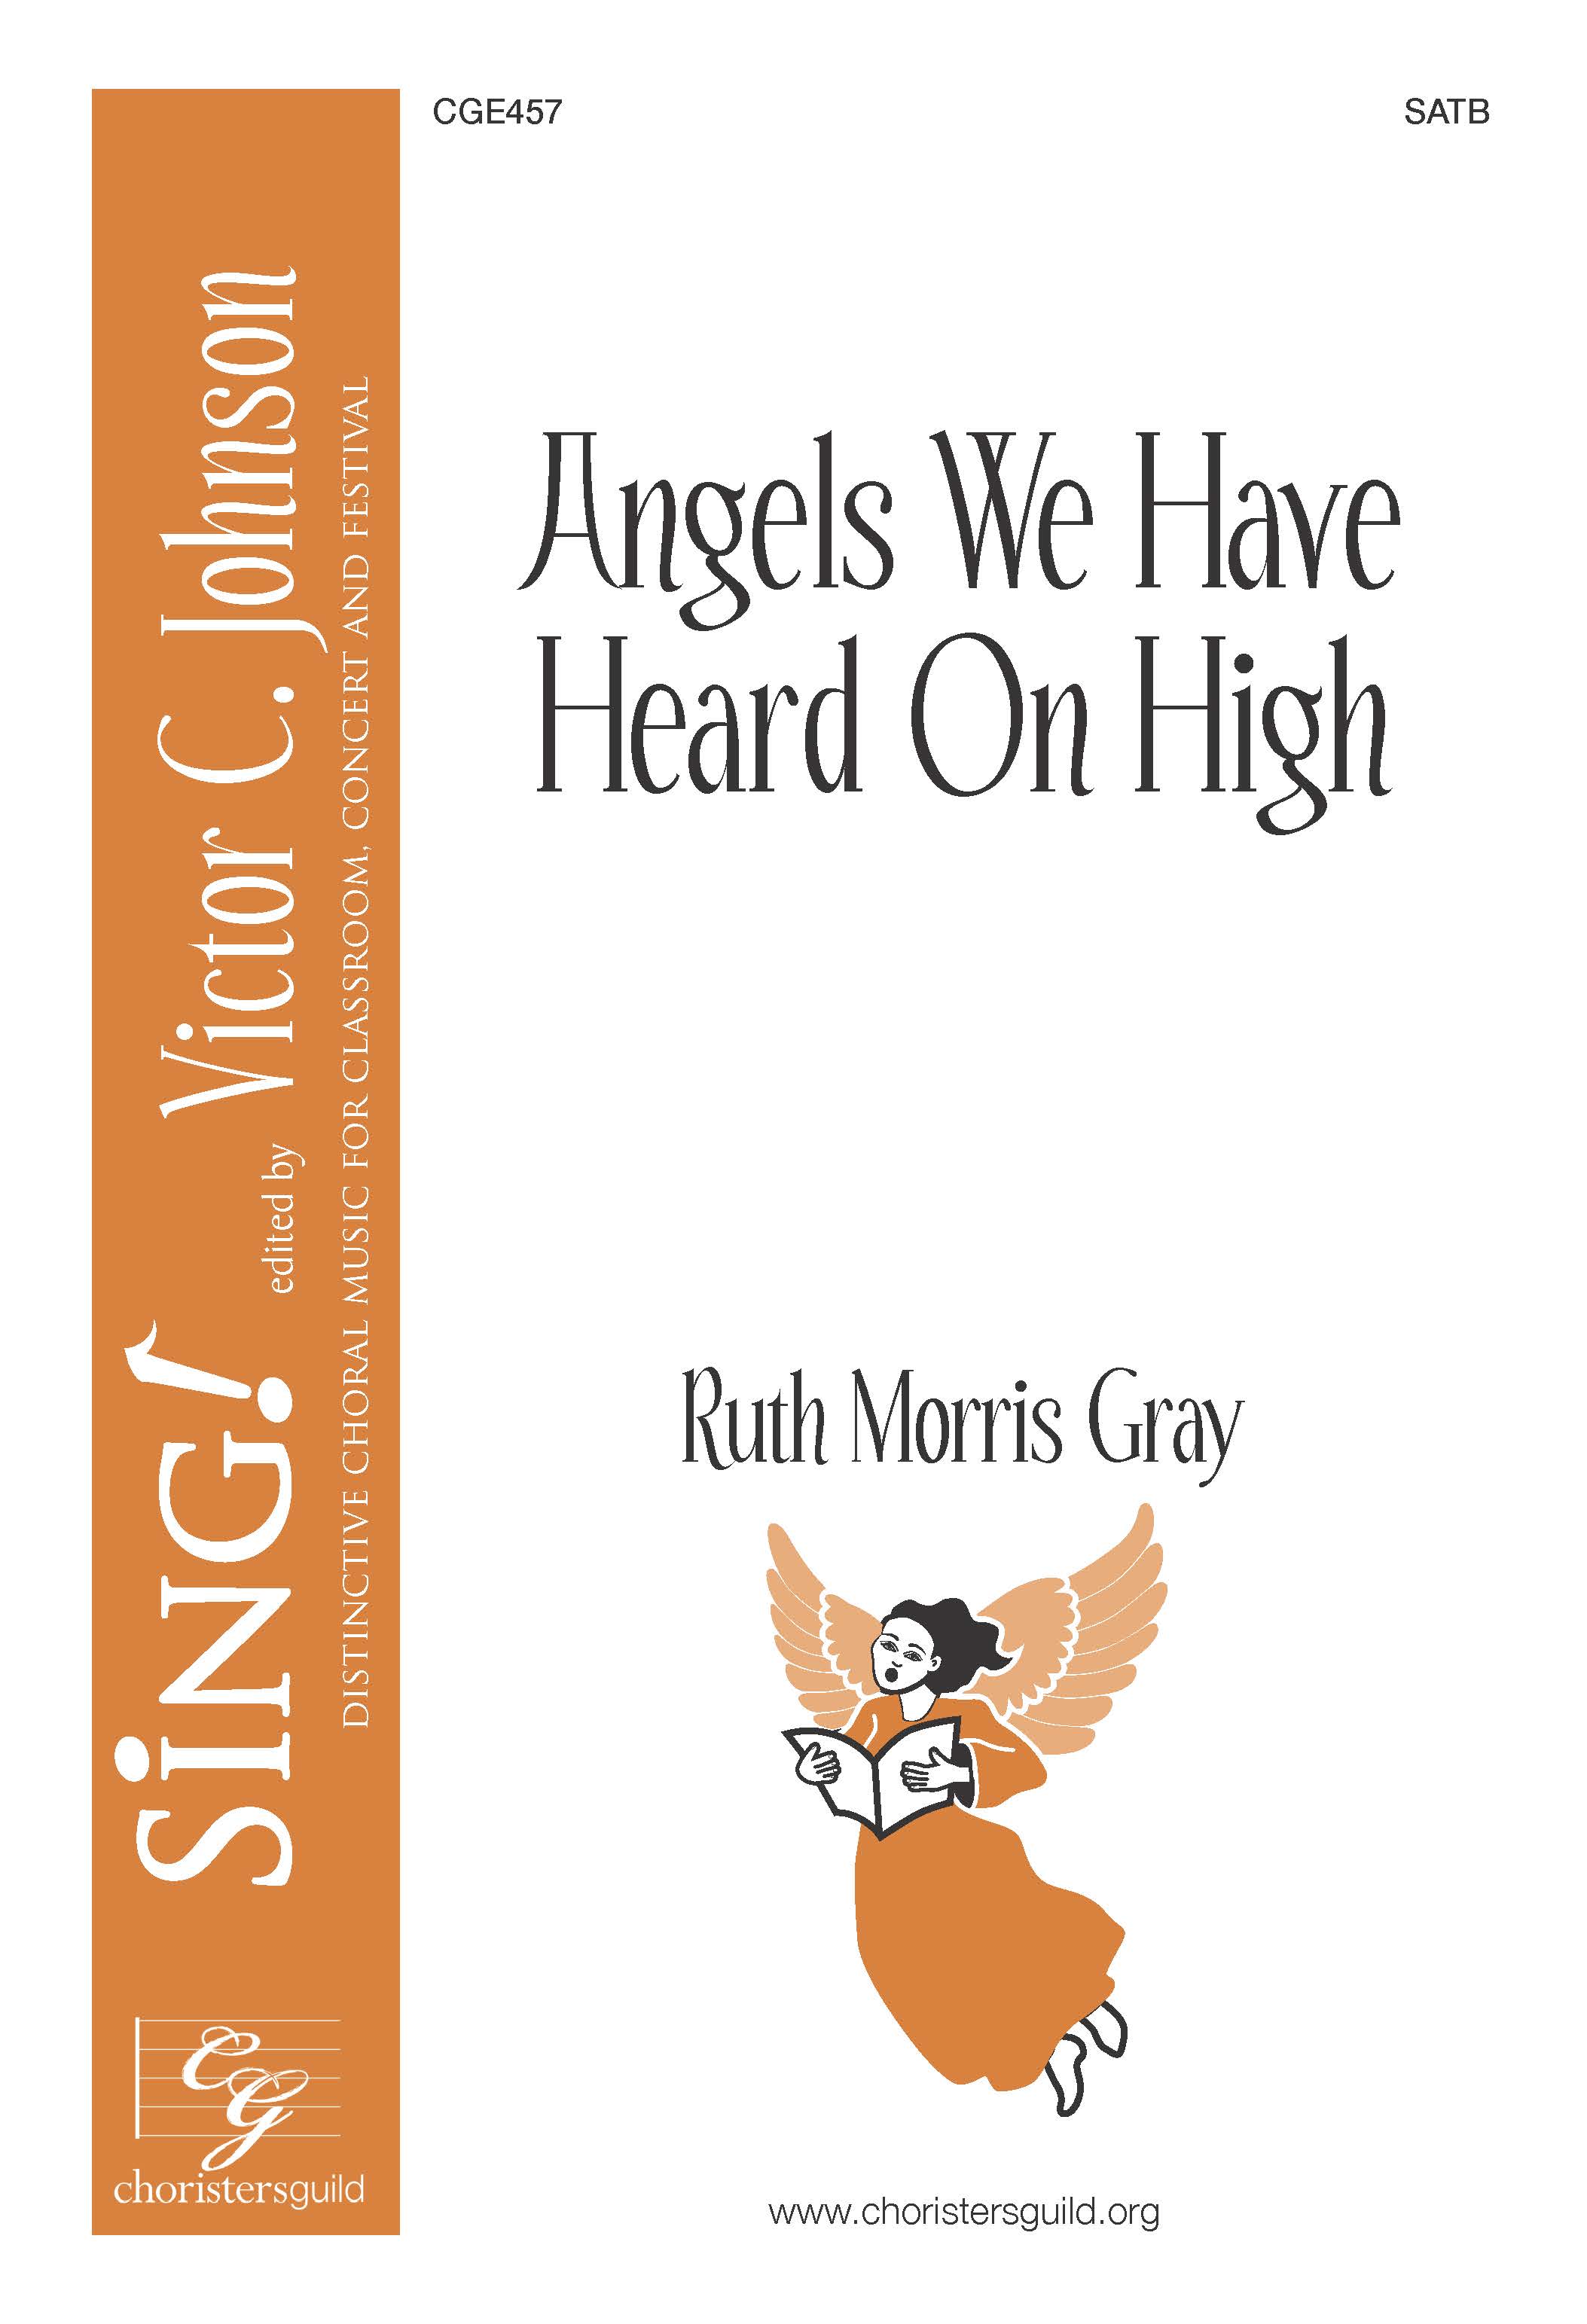 Angels We Have Heard on High - SATB